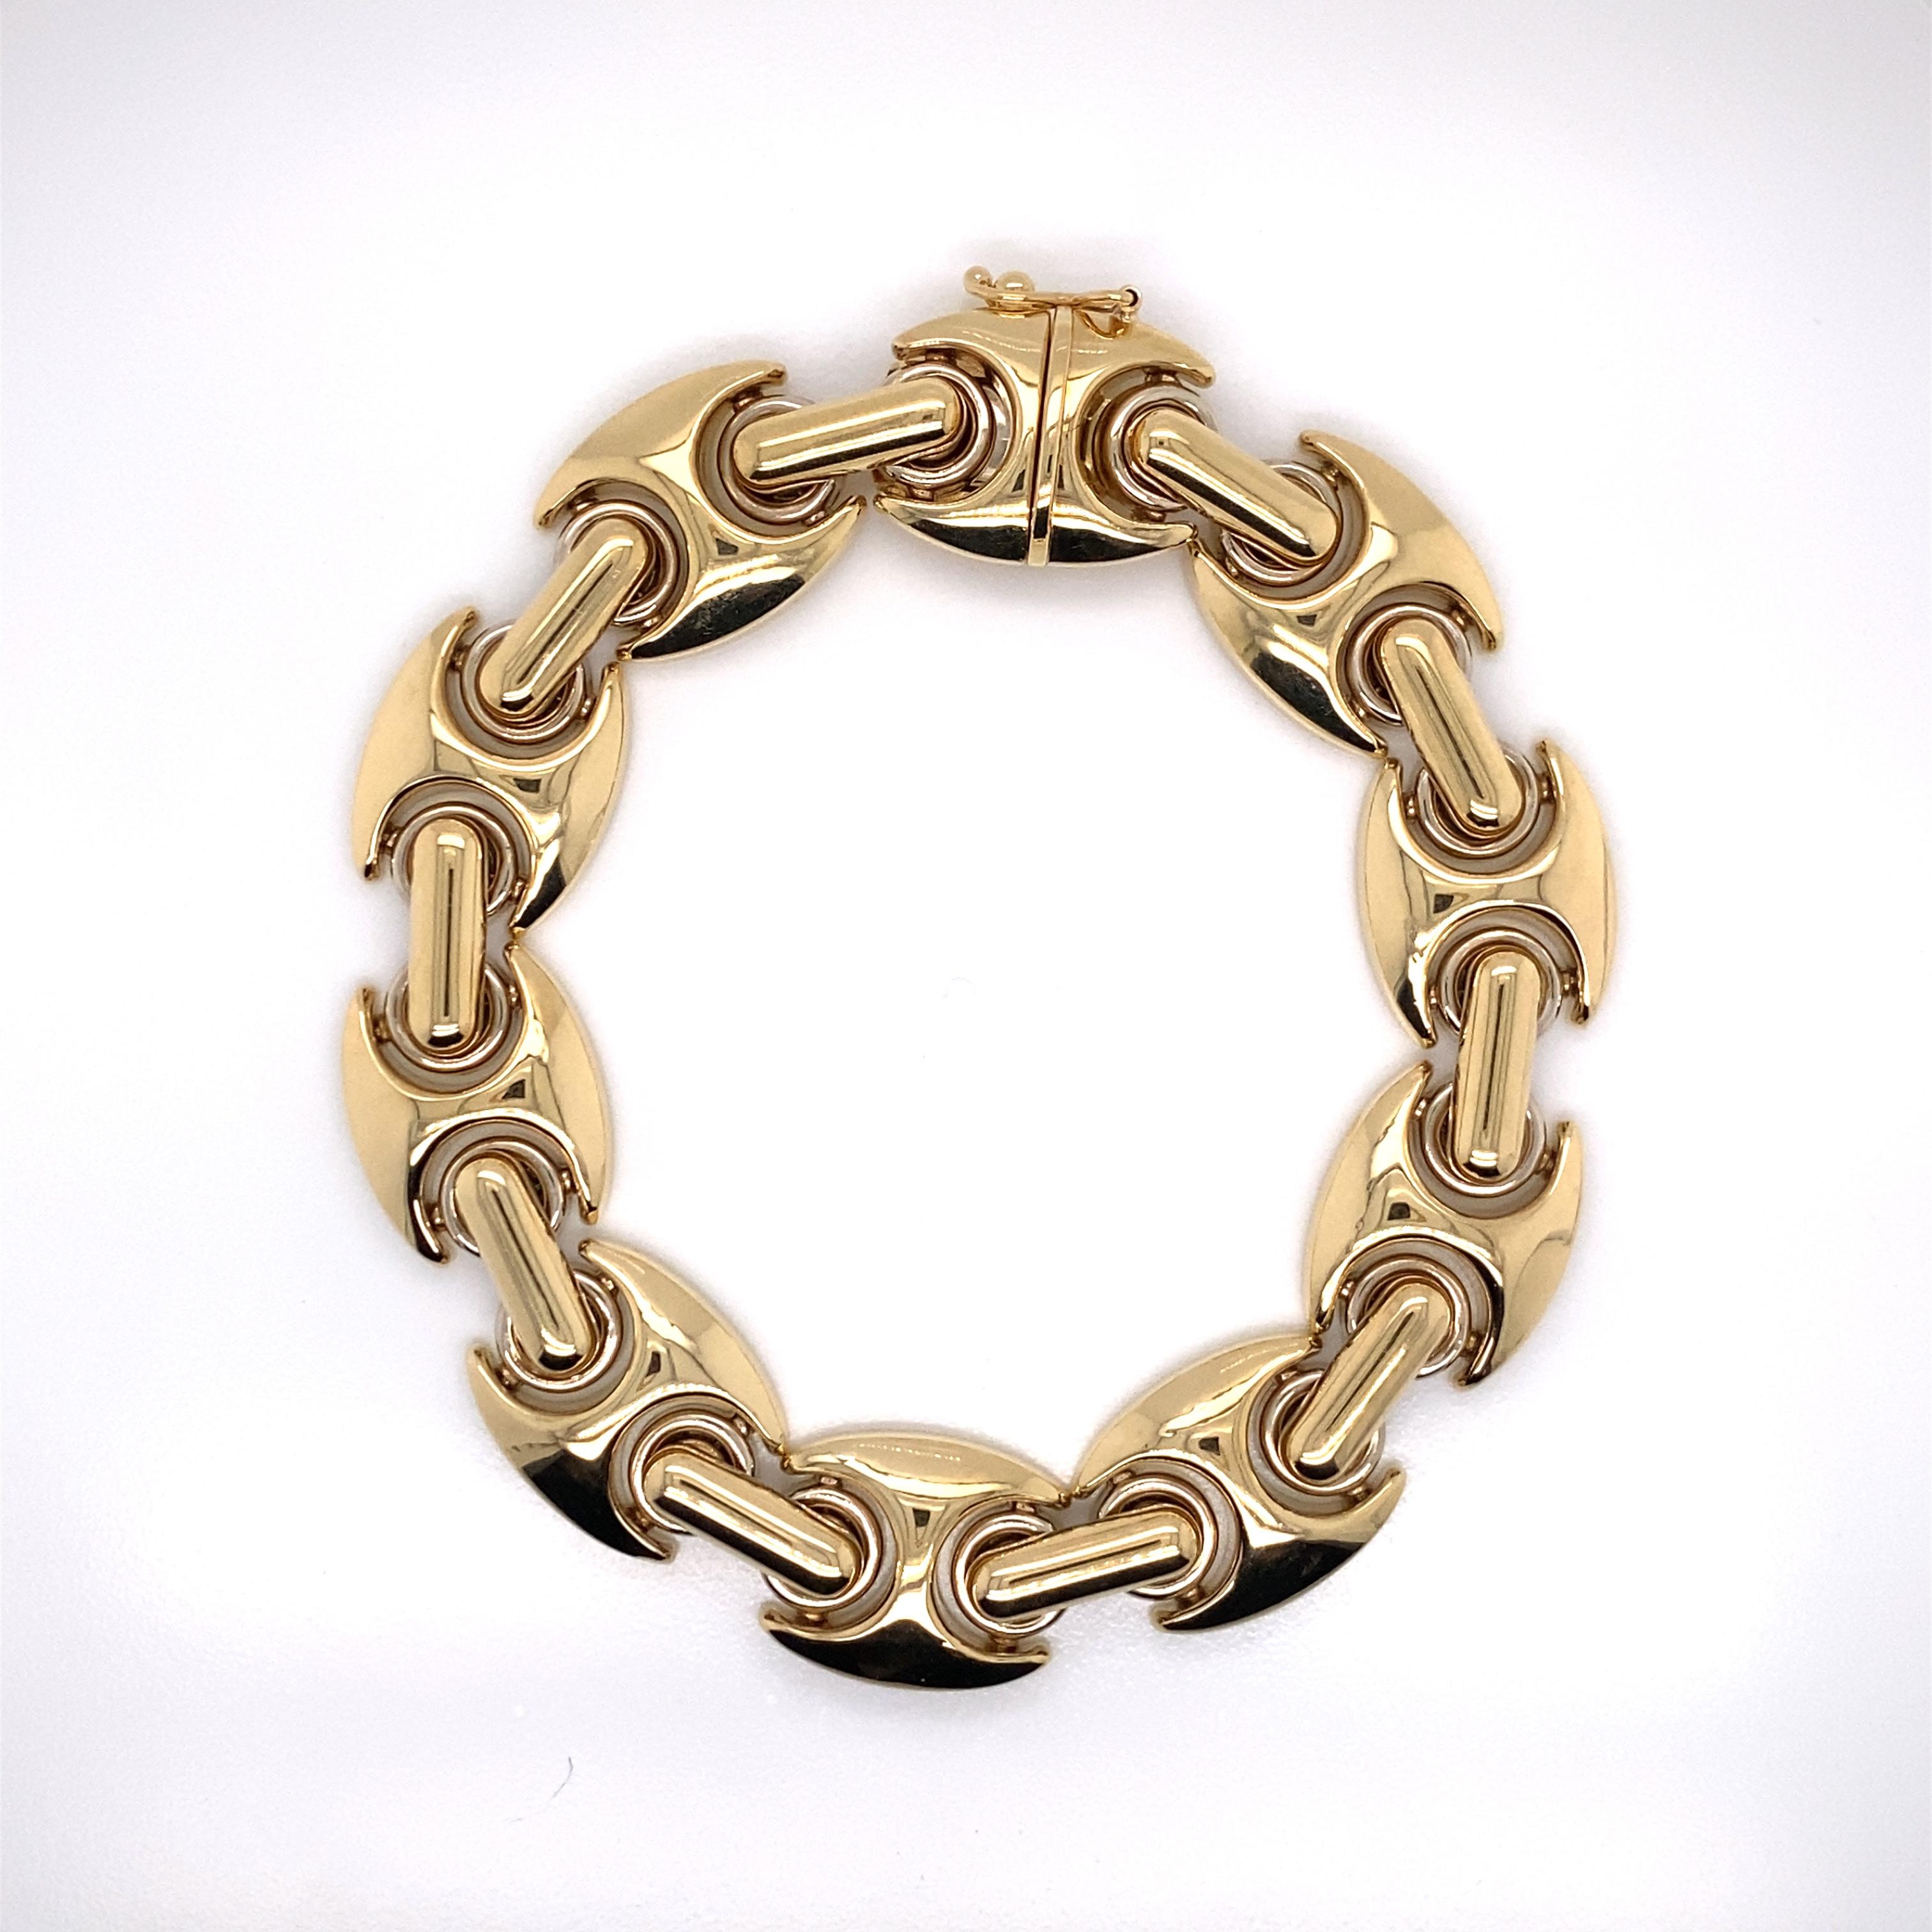 Vintage 1990's 14k Yellow Gold Italian Made Wide Link Bracelet In New Condition For Sale In Boston, MA